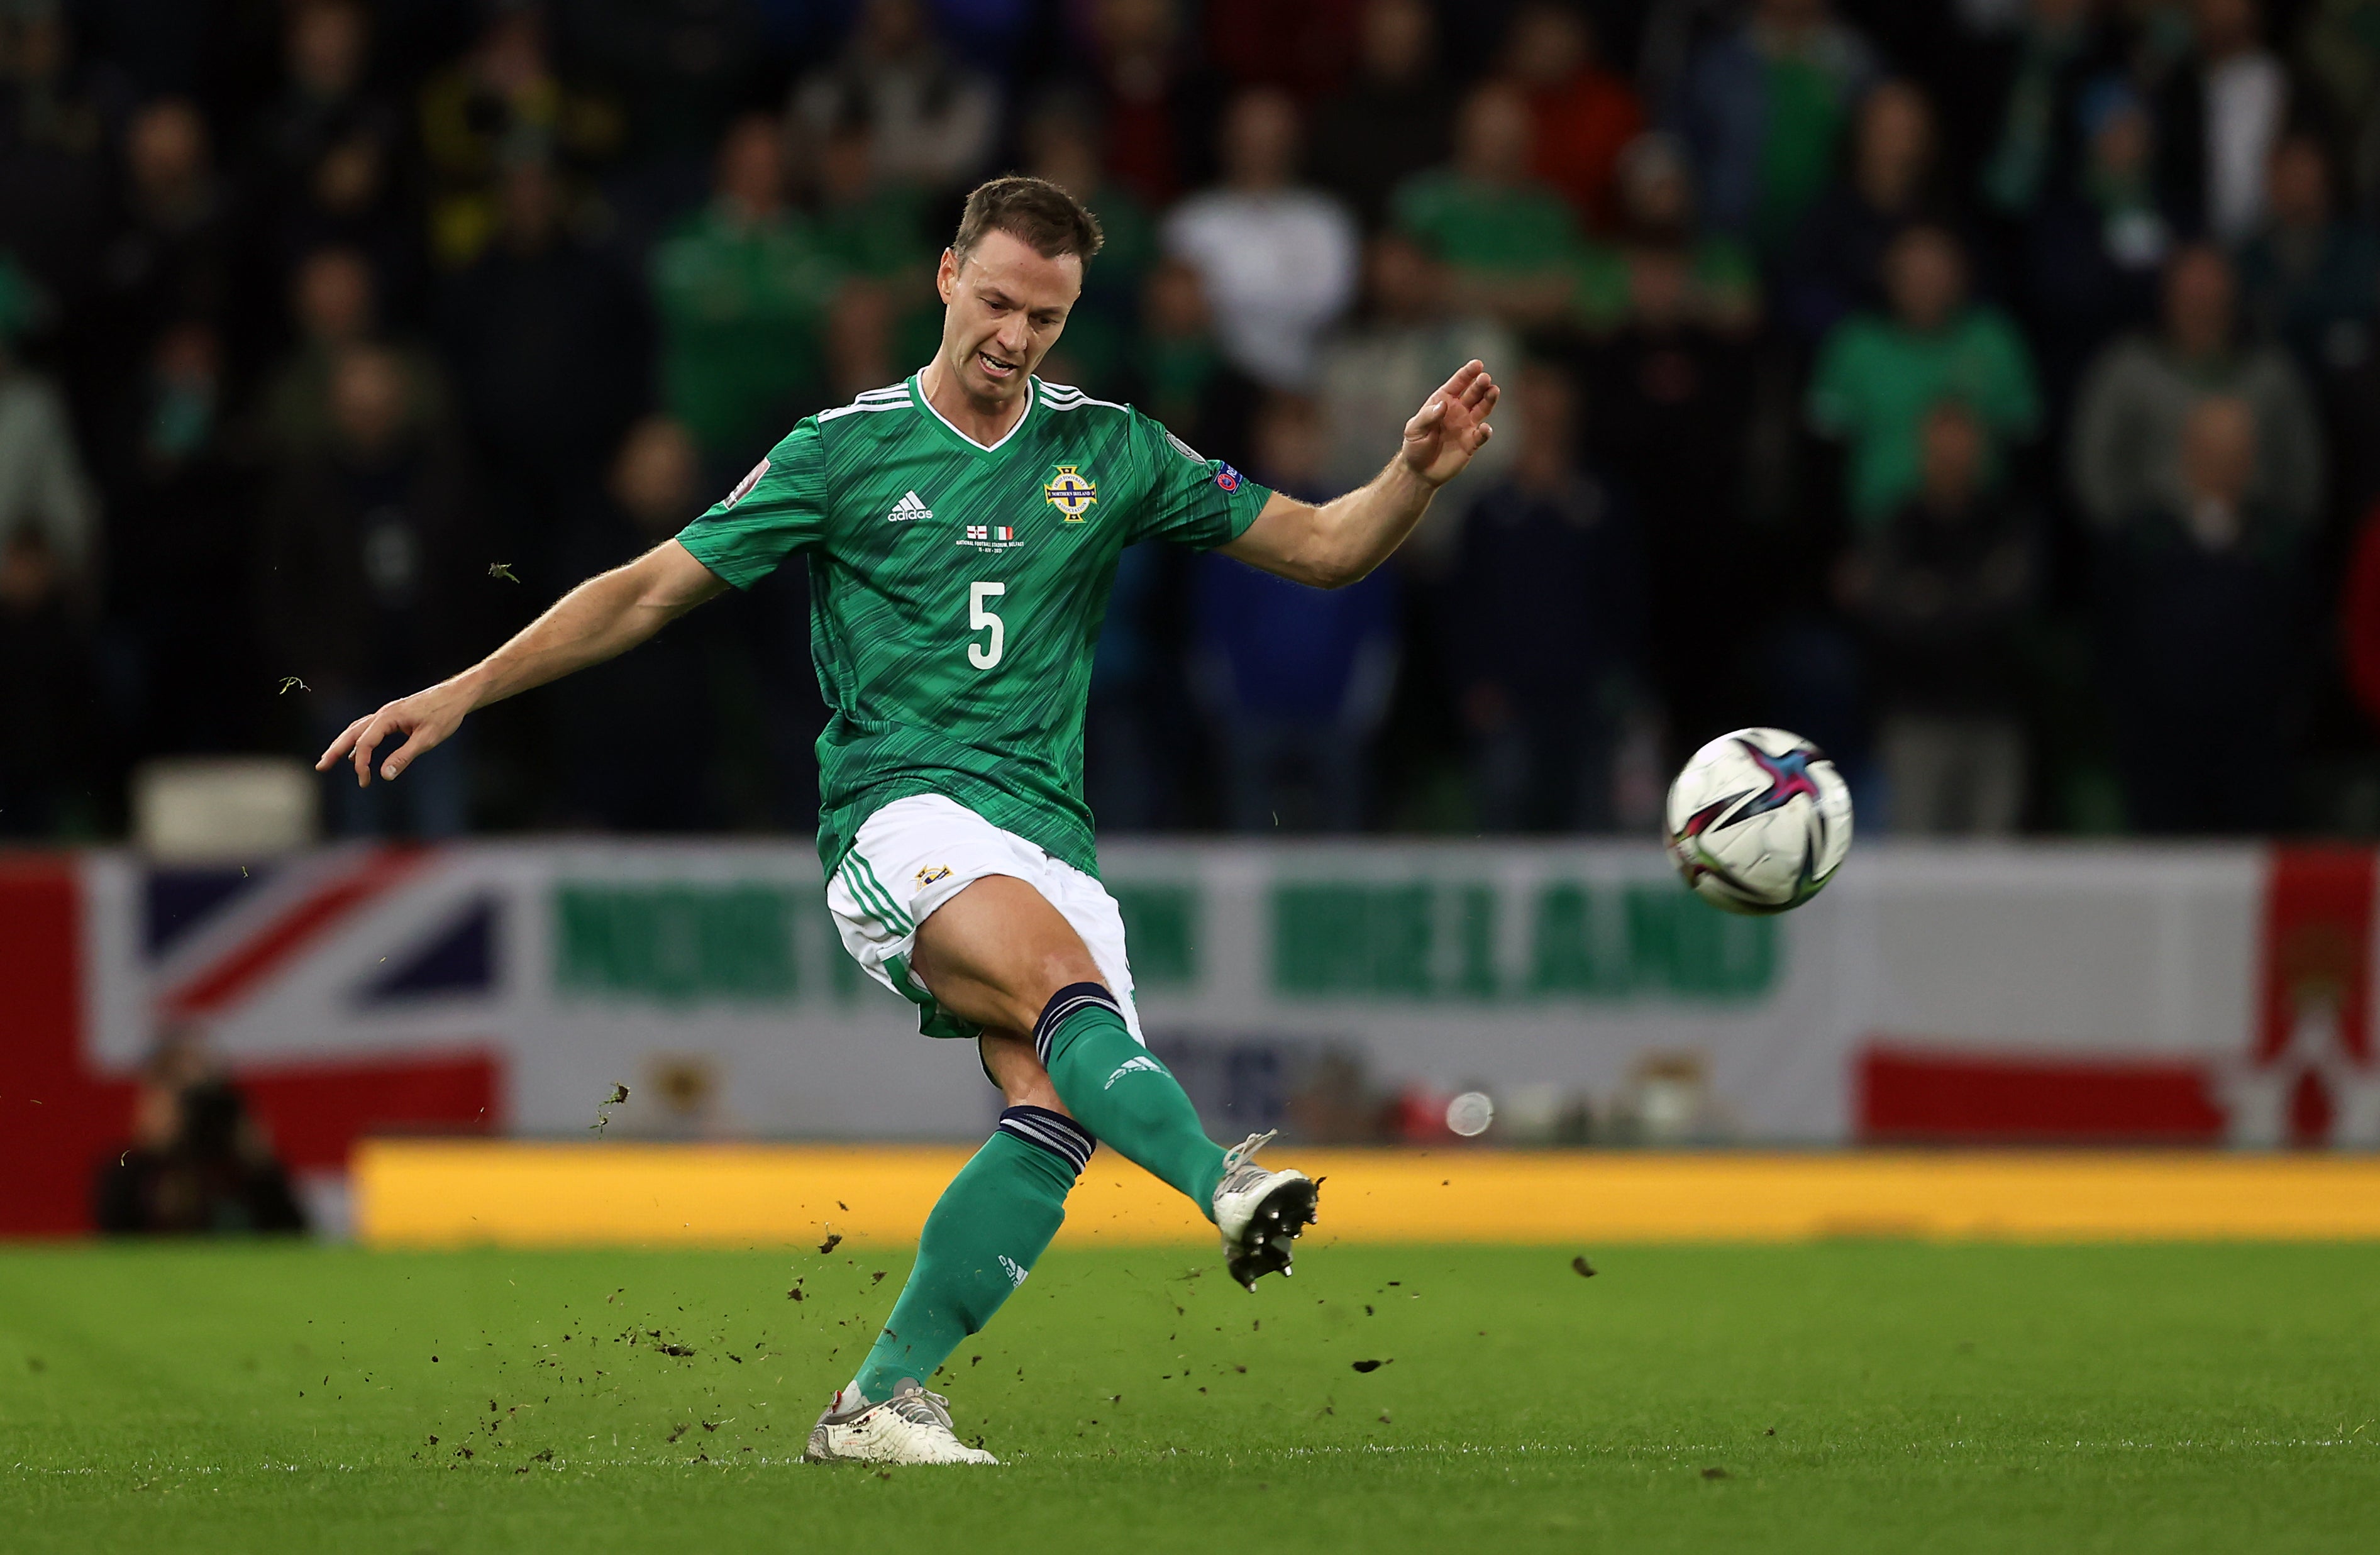 Jonny Evans is set to start for Northern Ireland on Friday after a sooner-than-expected return from a hamstring injury (Liam McBurney/PA)